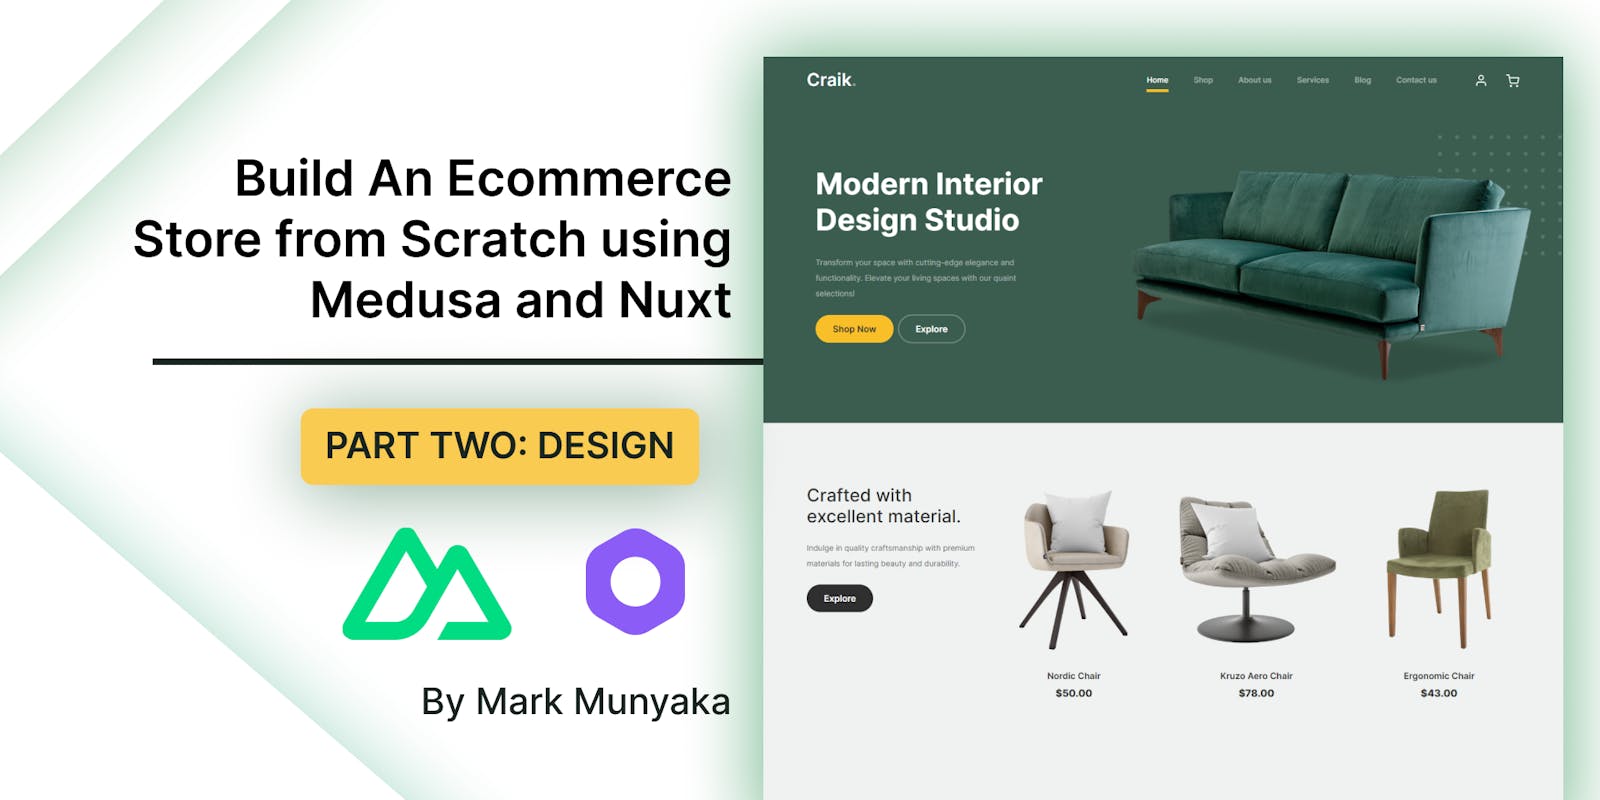 Build An Ecommerce Store from Scratch using Medusa and Nuxt: Part 02